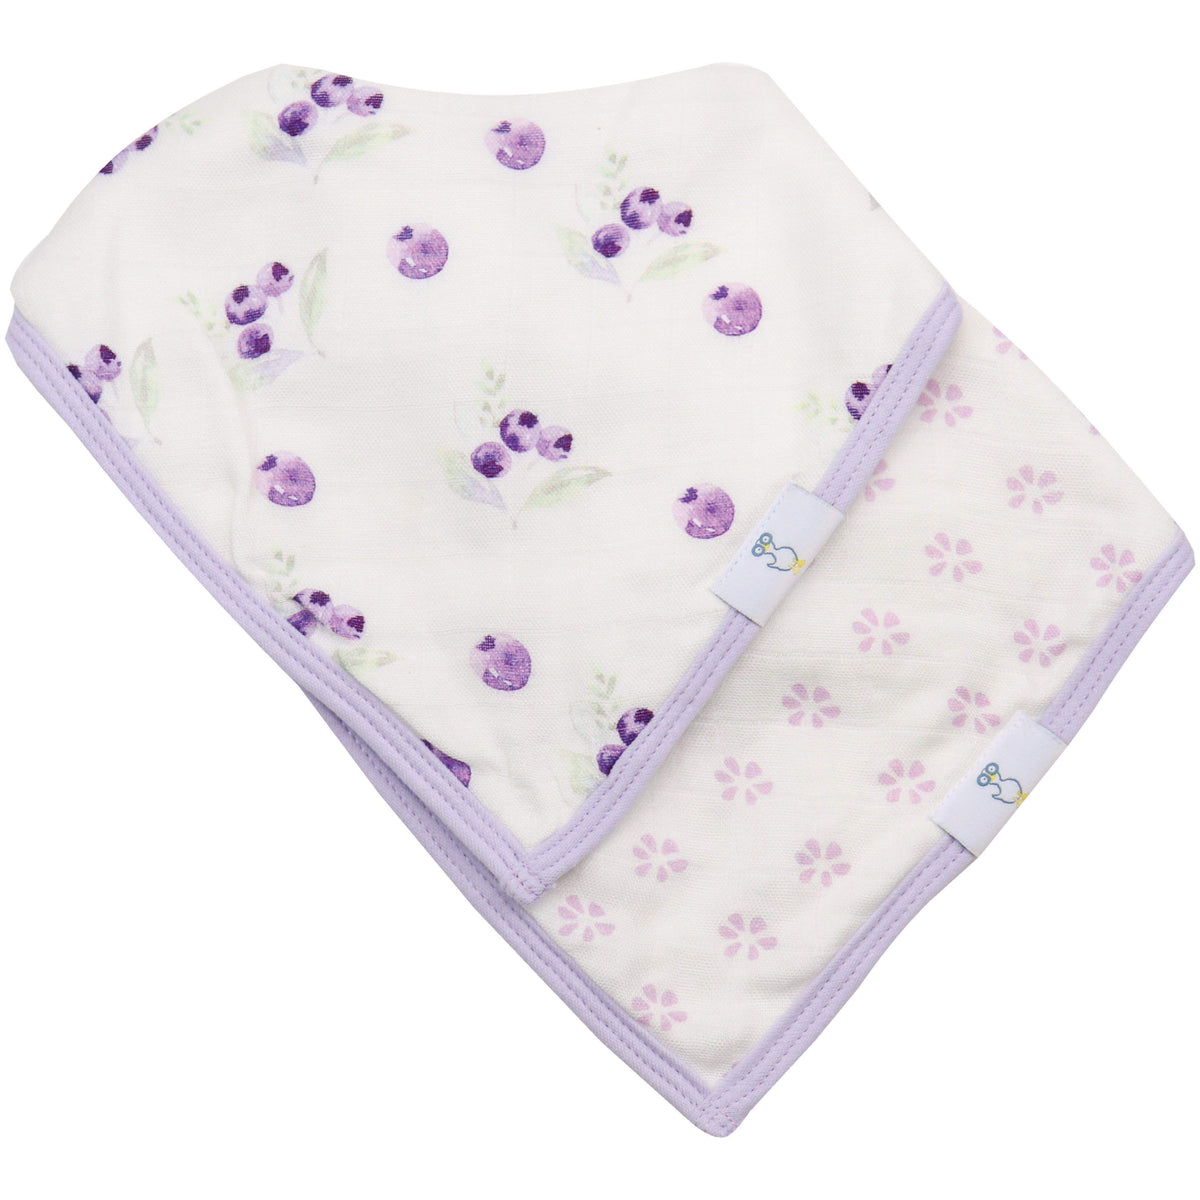 Goosewaddle 2 Pack Muslin &amp; Terry Cloth Bib Set, Blueberries and Flowers